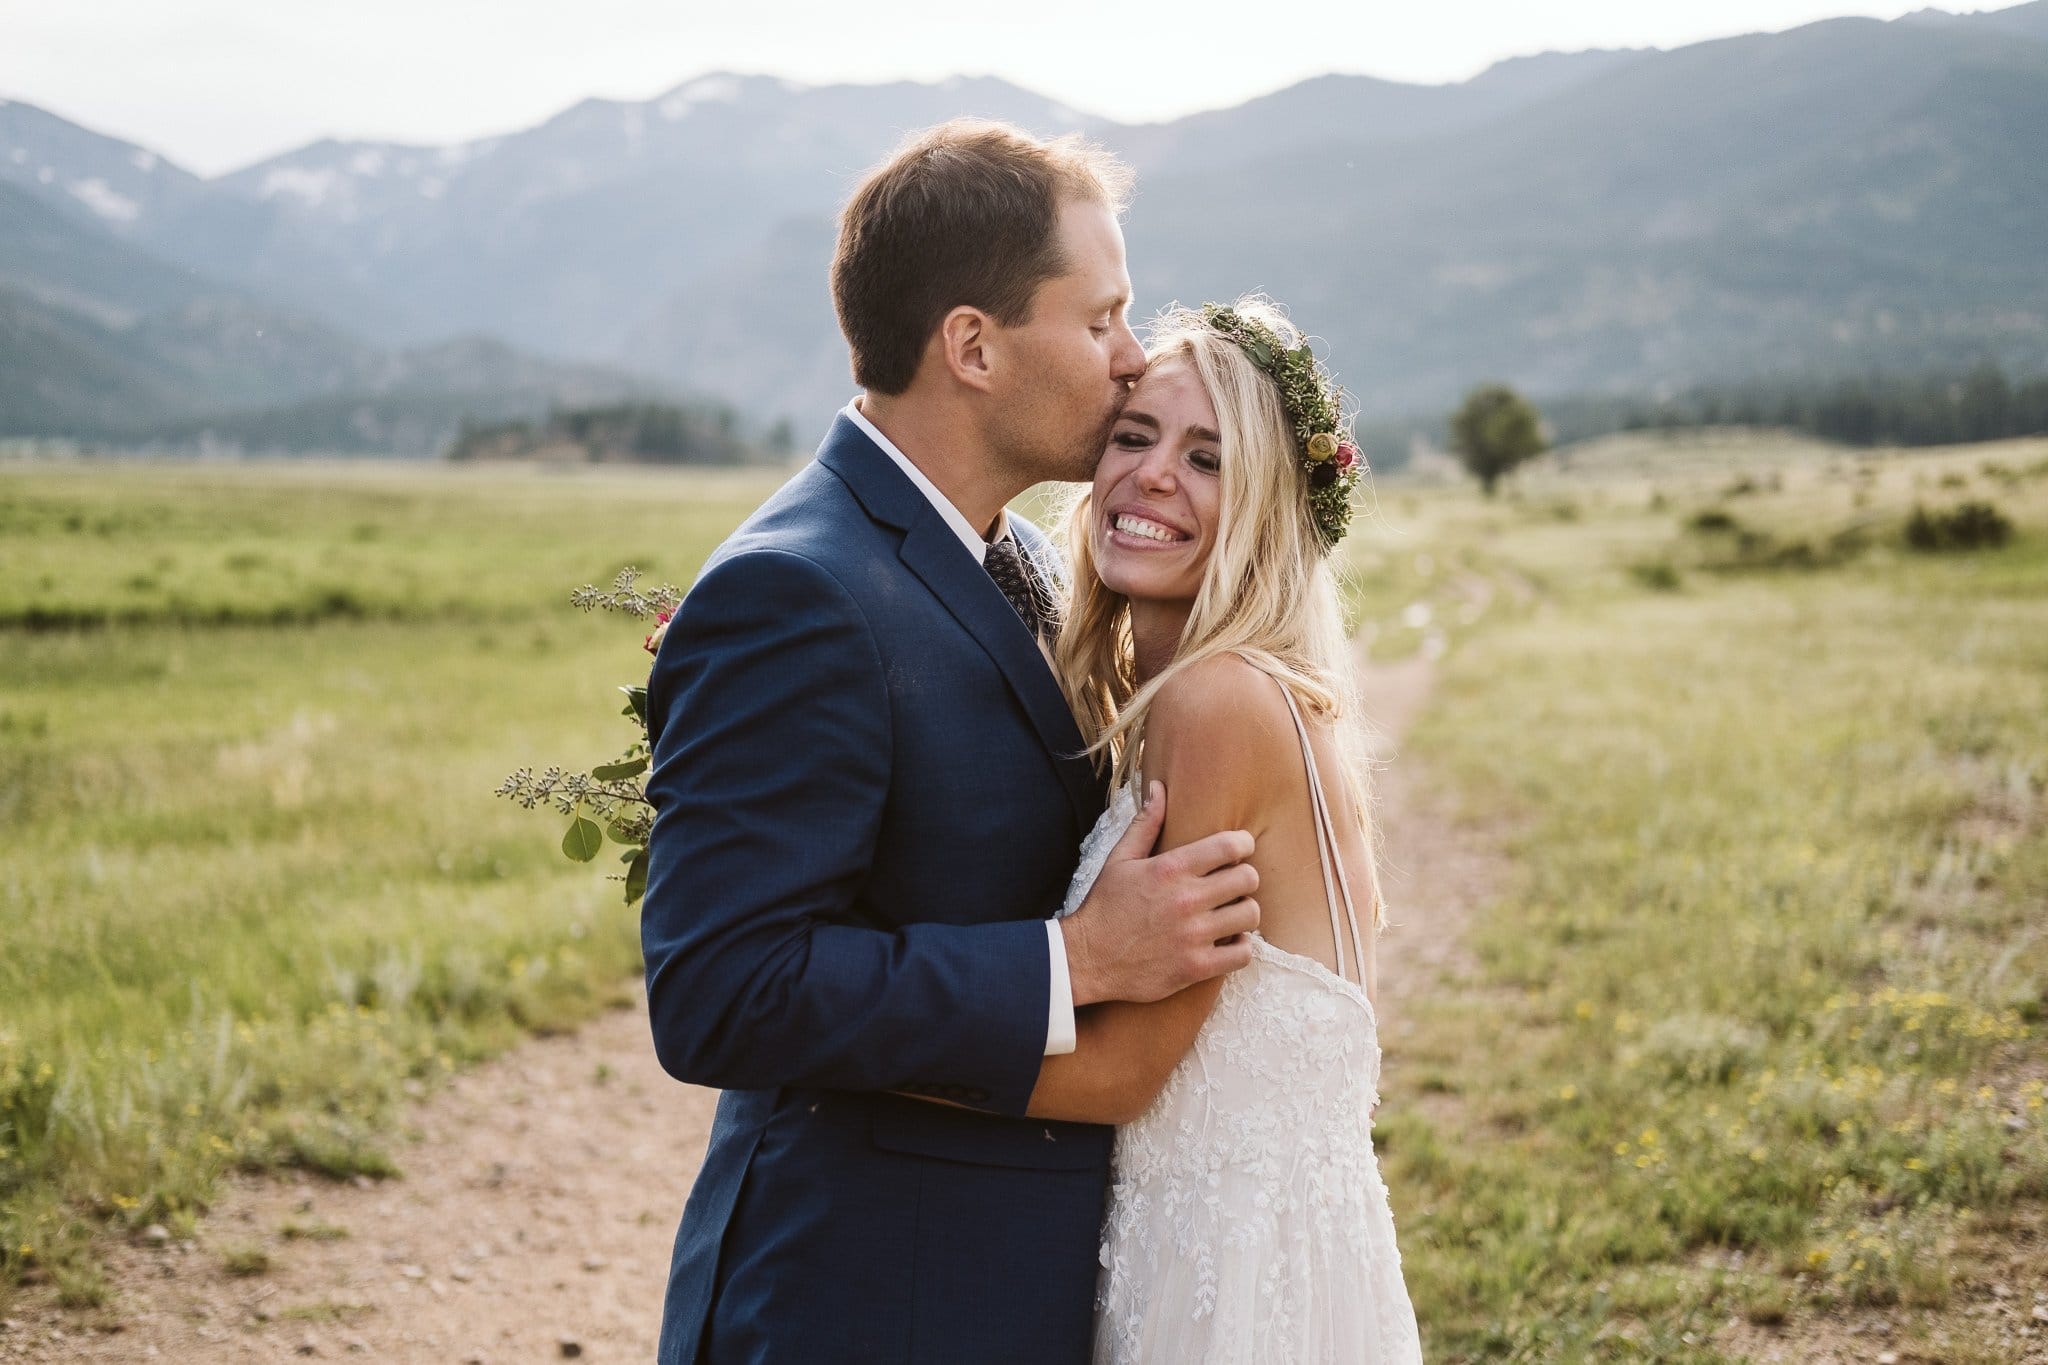 Bride and groom hiking in Moraine Valley for Rocky Mountain National Park elopement, Colorado elopement photographer, adventure elopement